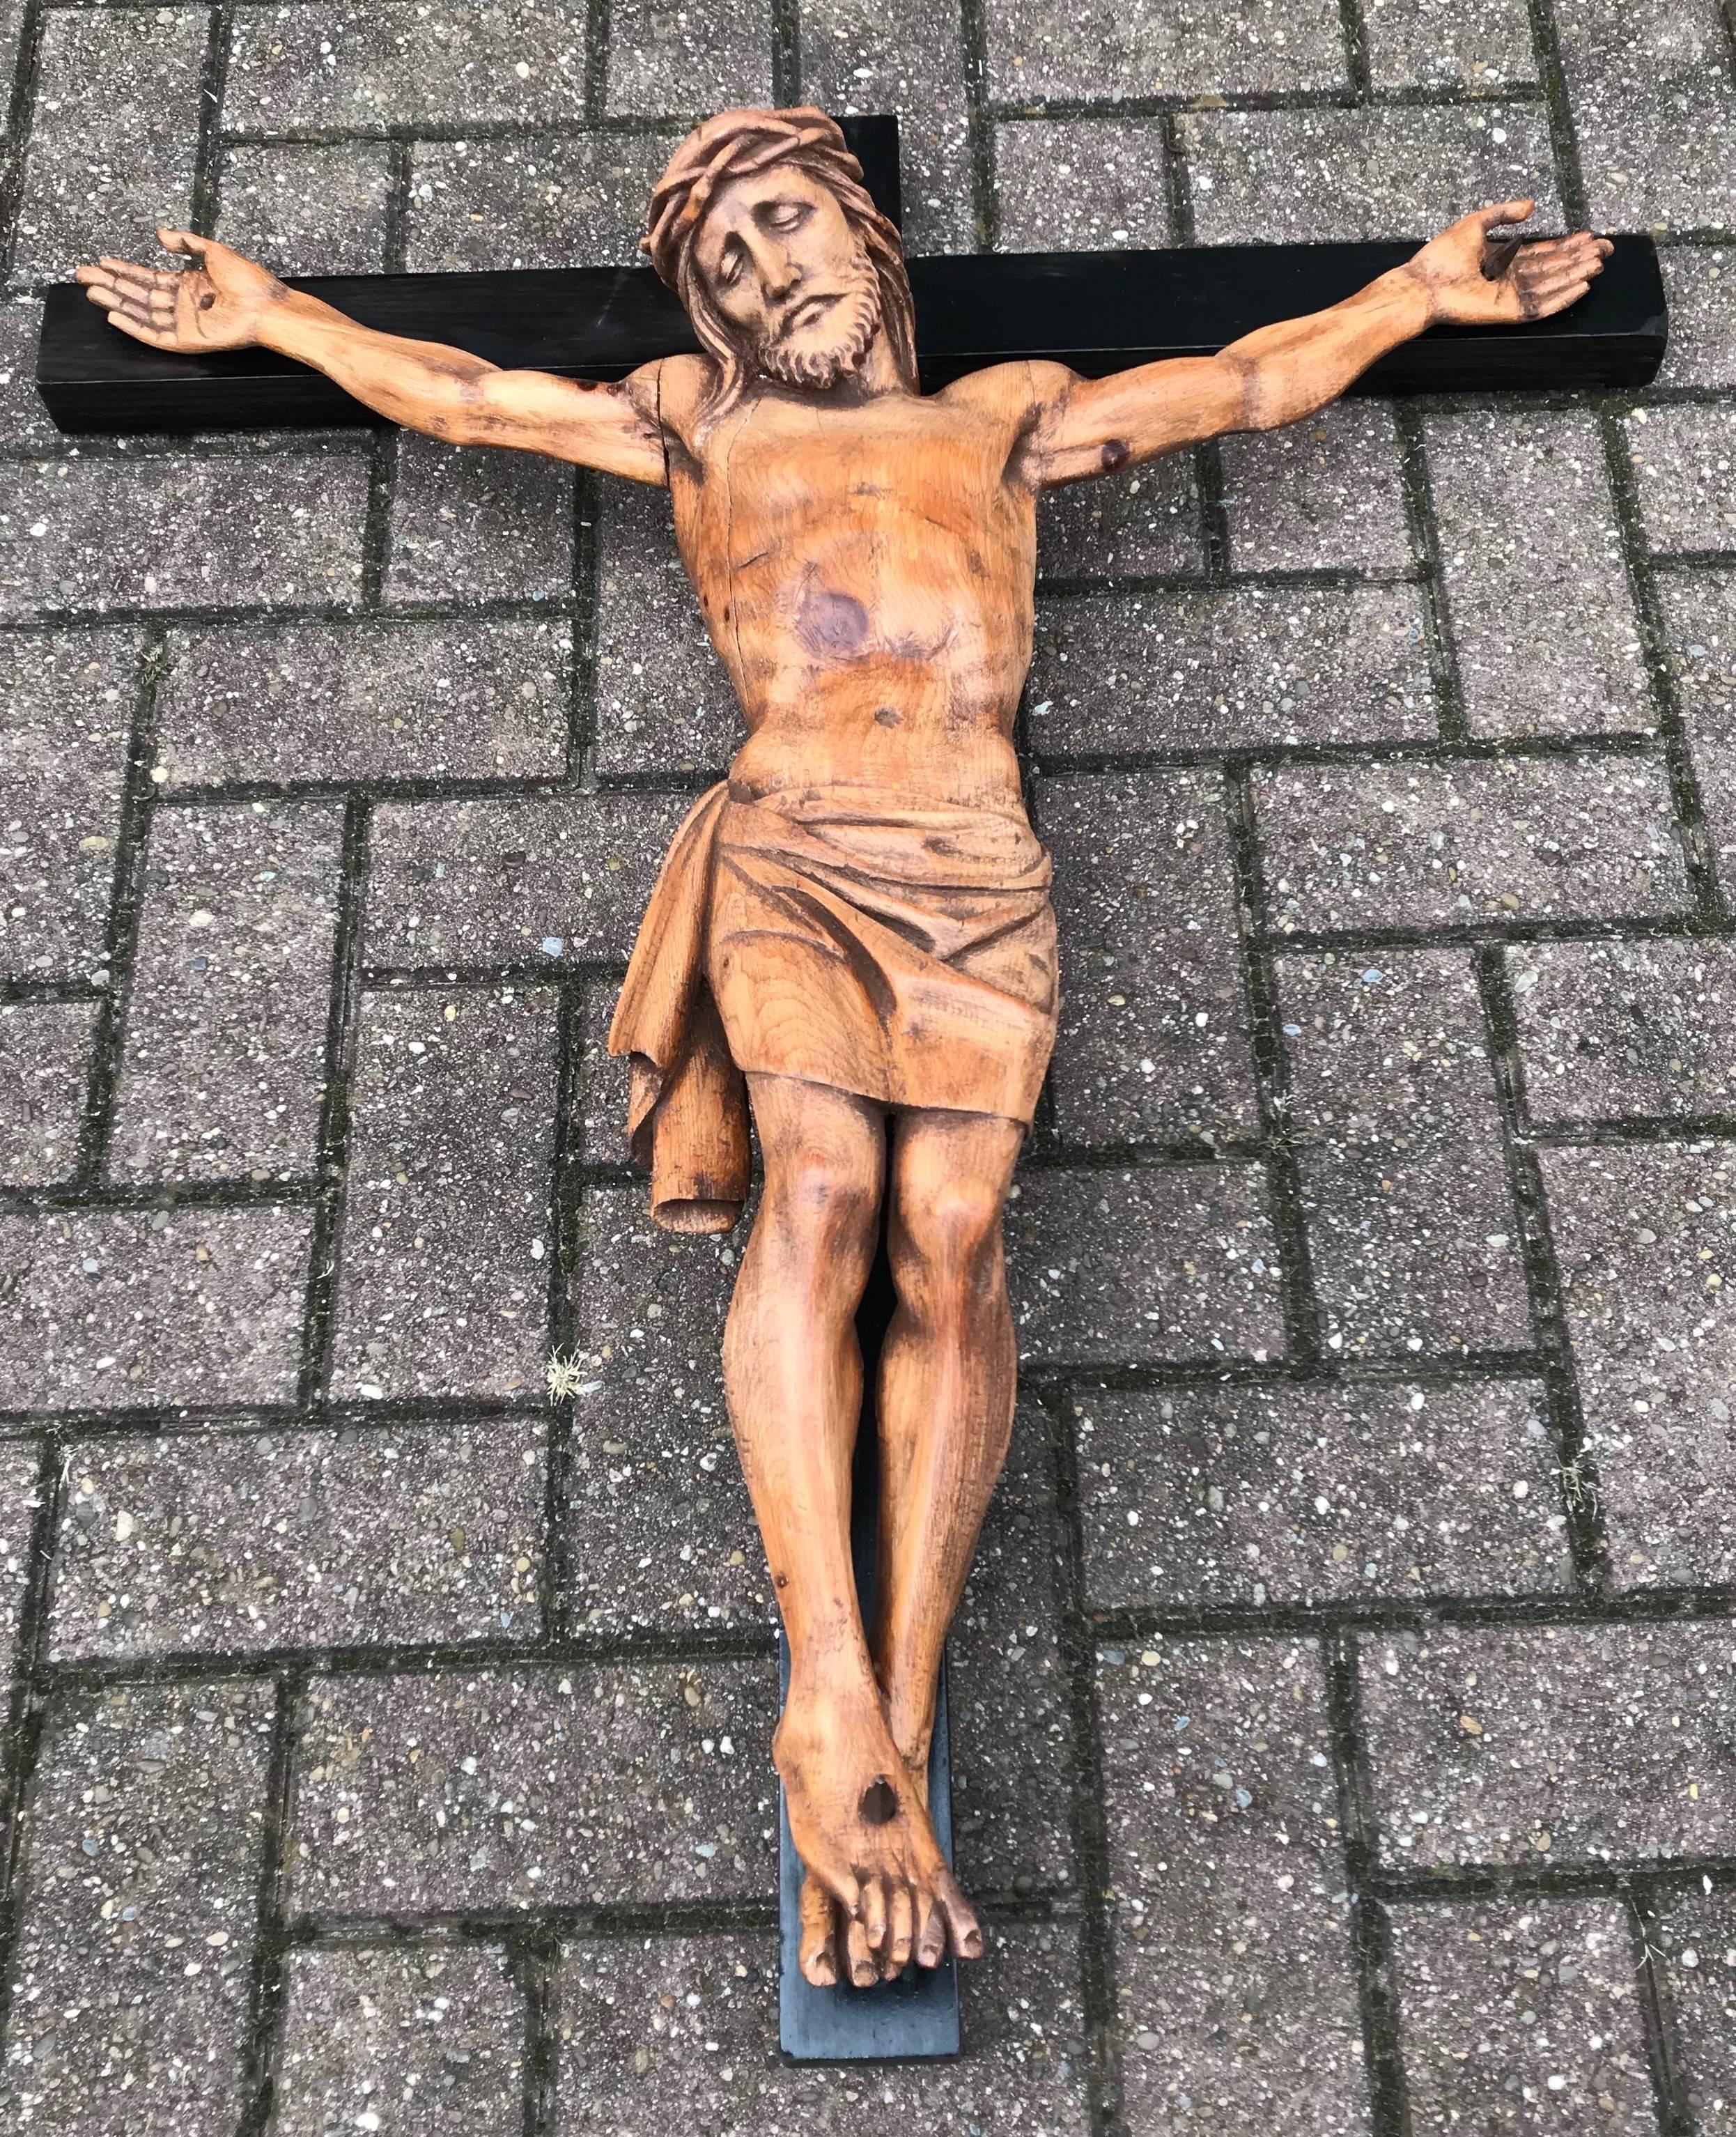 Large size sculpture and an impressive religious work of art.

Looking at Christ suffering like this, the crucifix (in our view) is a symbol of what 'telling people the truth' can lead to. 'The truth does not have many friends' is something I once